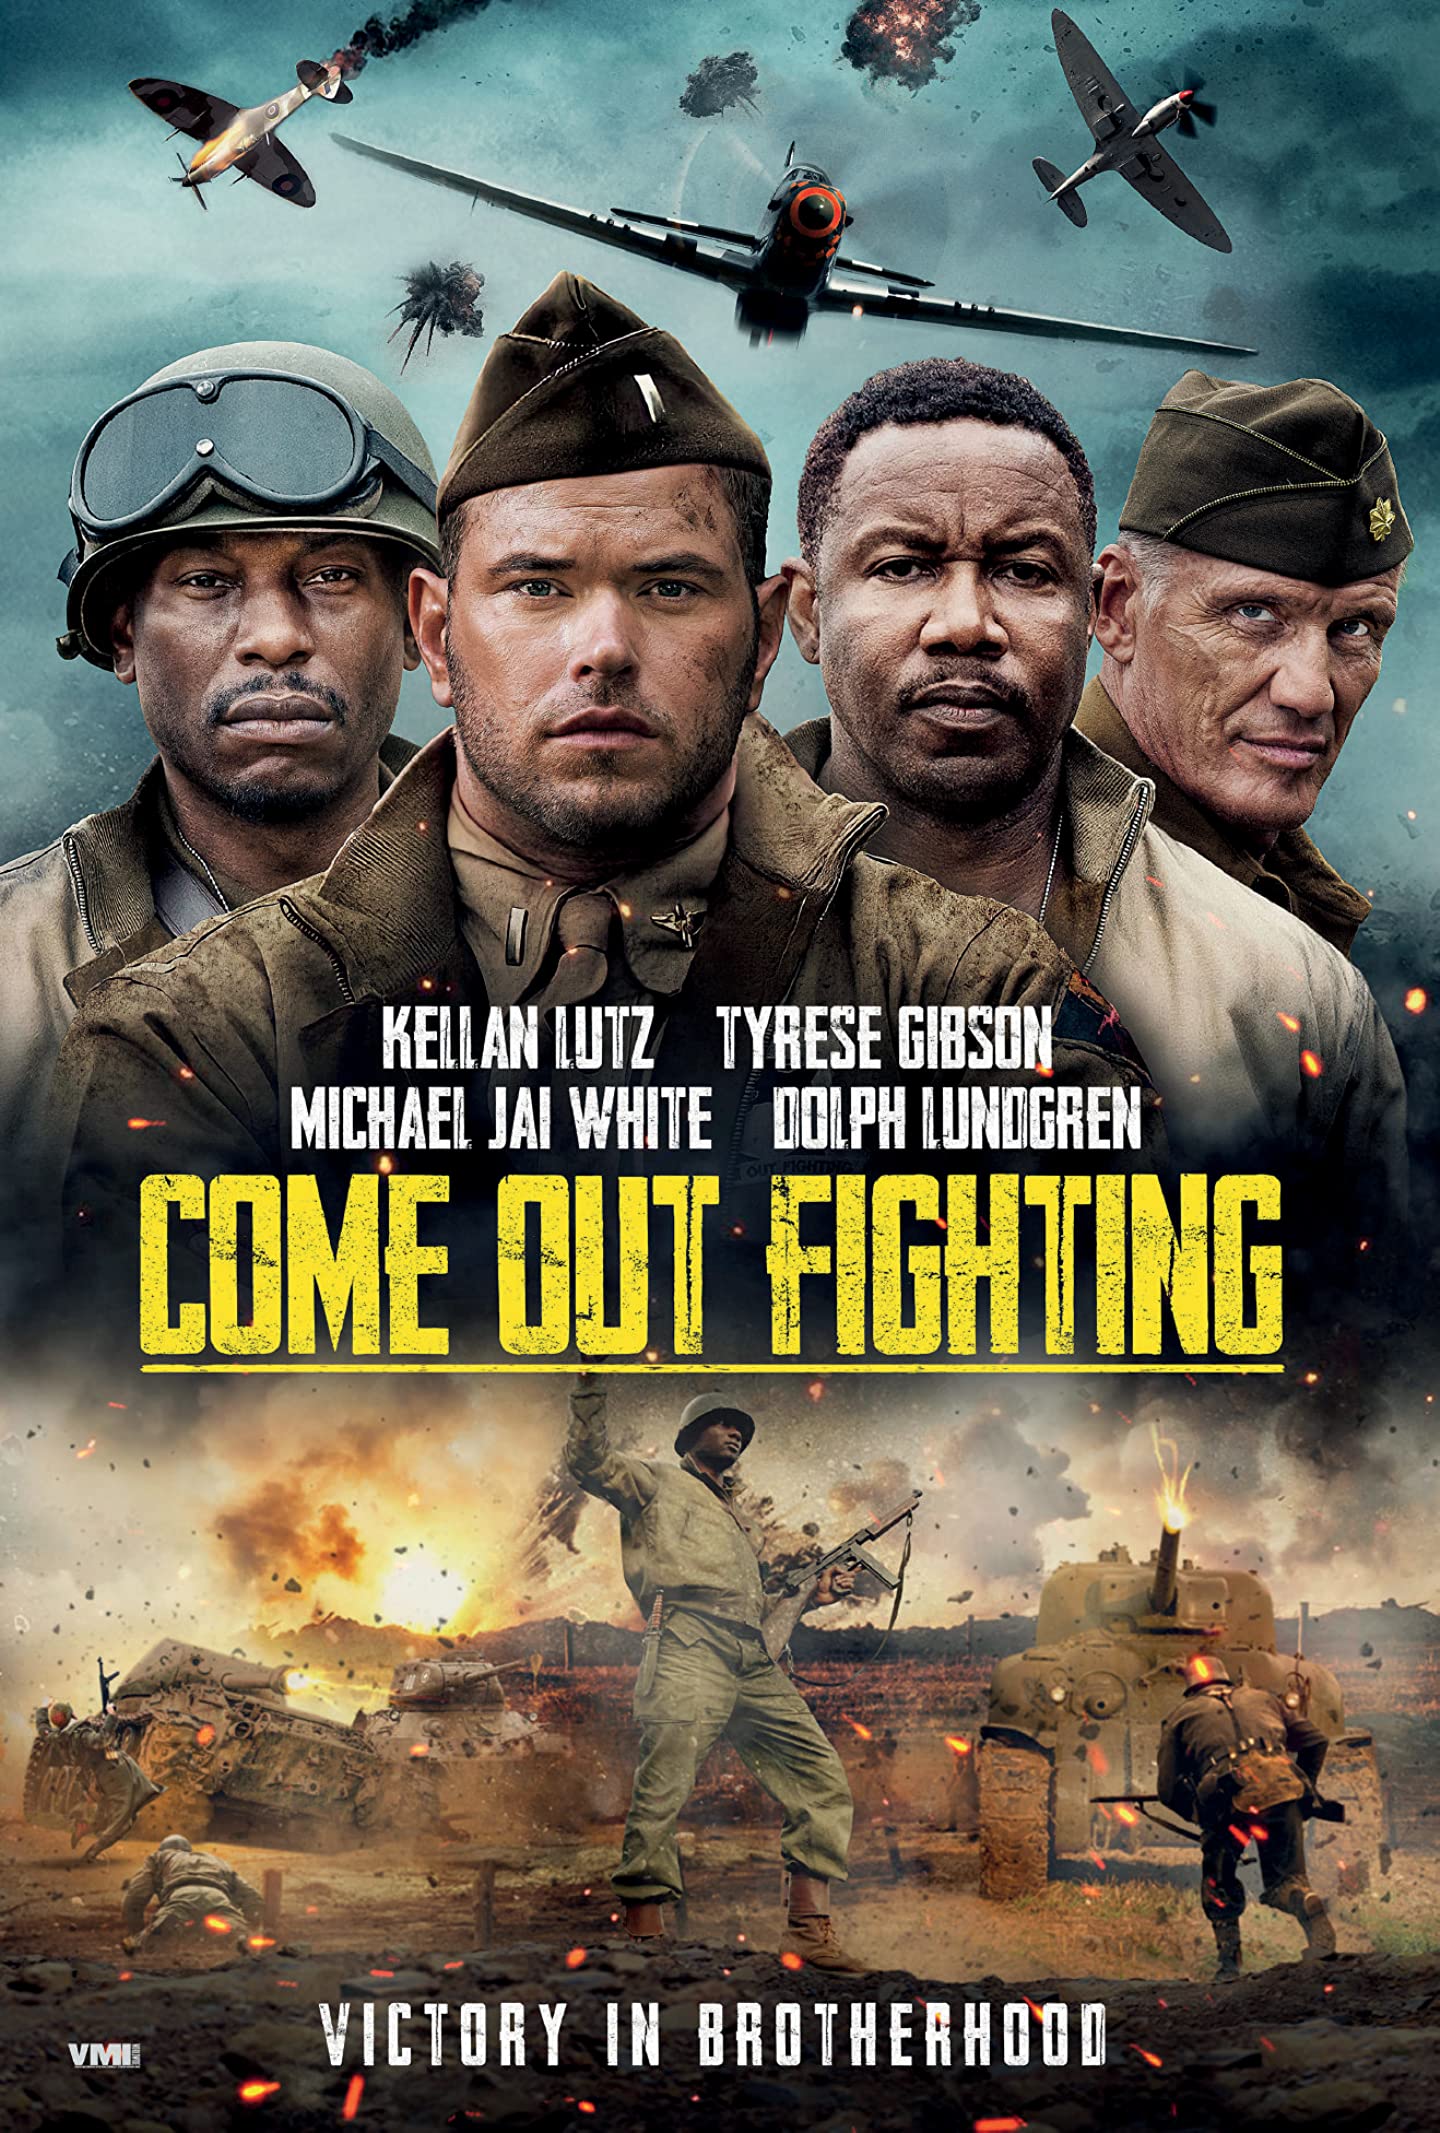 1st Trailer For 'Come Out Fighting' Movie Starring Dolph Lundgren, Michael Jai White, & Tyrese Gibson